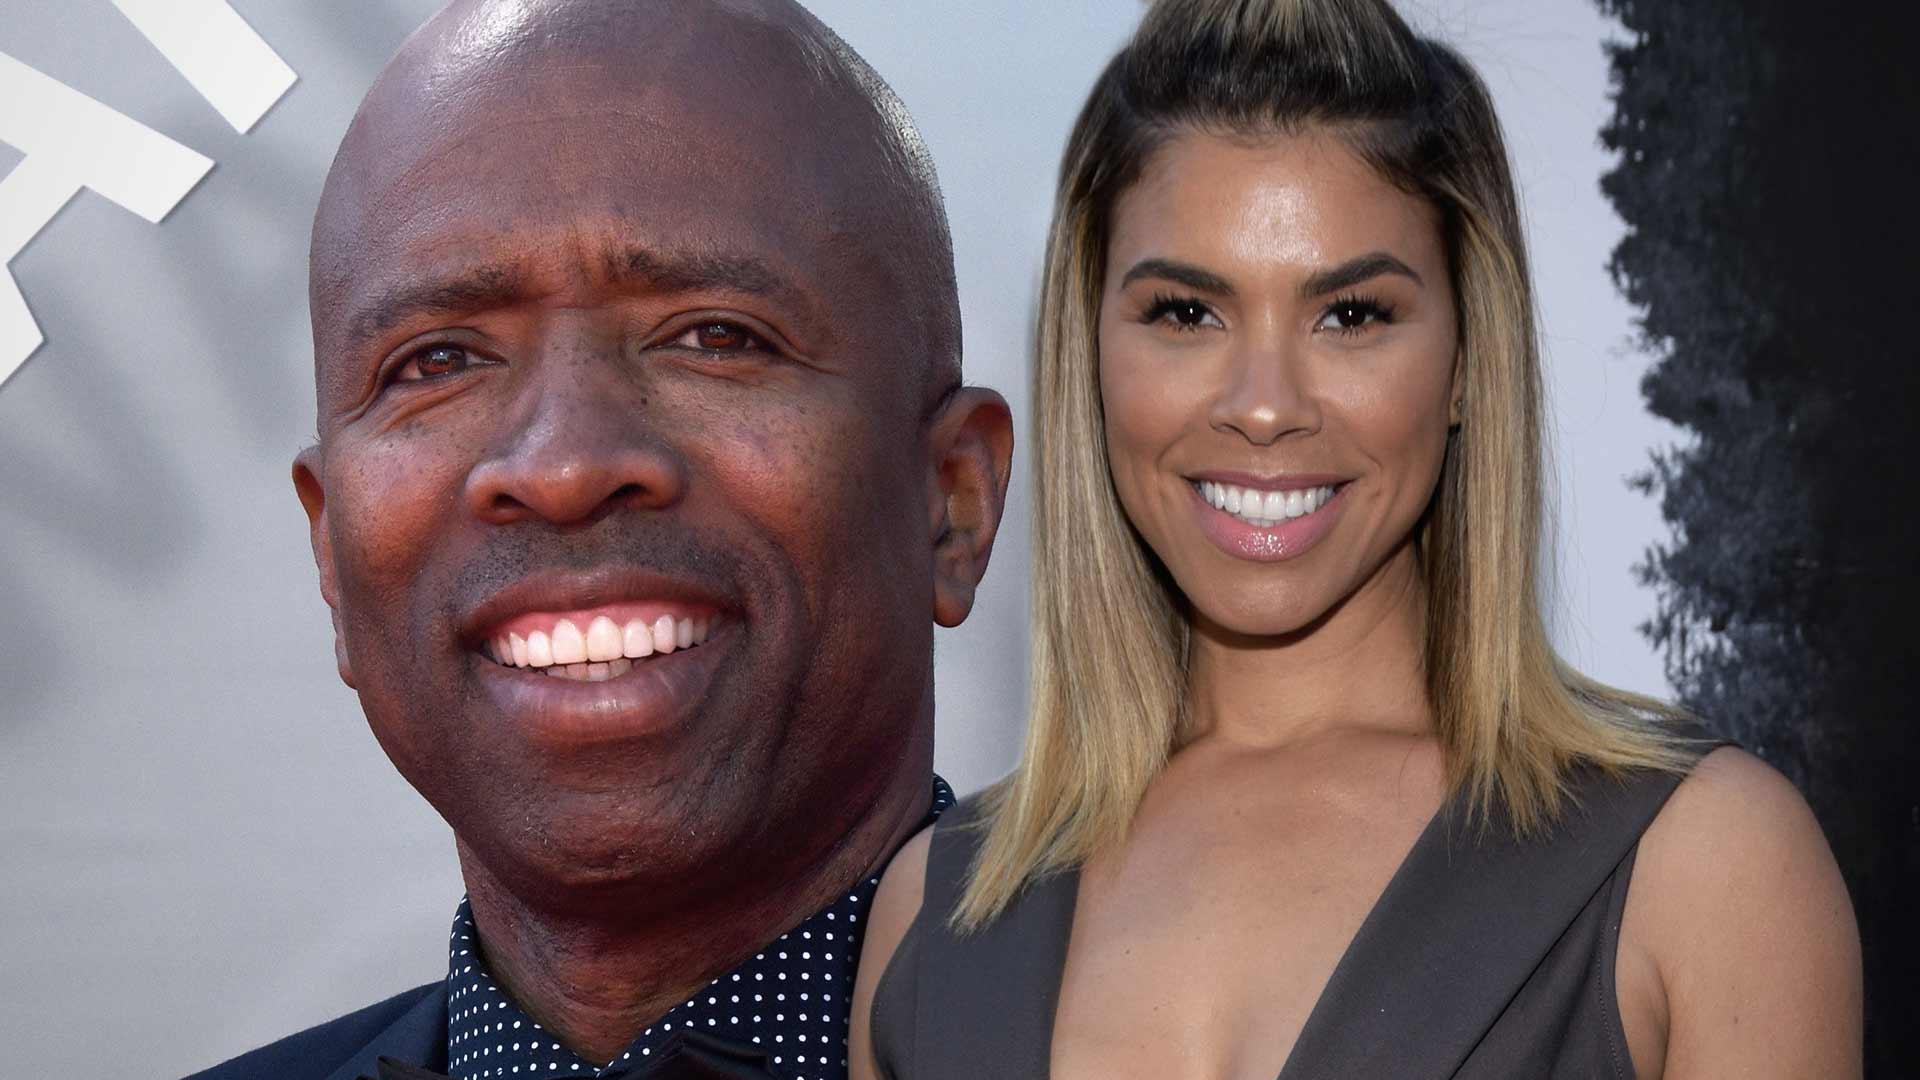 Kenny Smith’s Ex-Wife Garnishing His ‘Inside the NBA’ Paychecks to Pay Child and Spousal Support